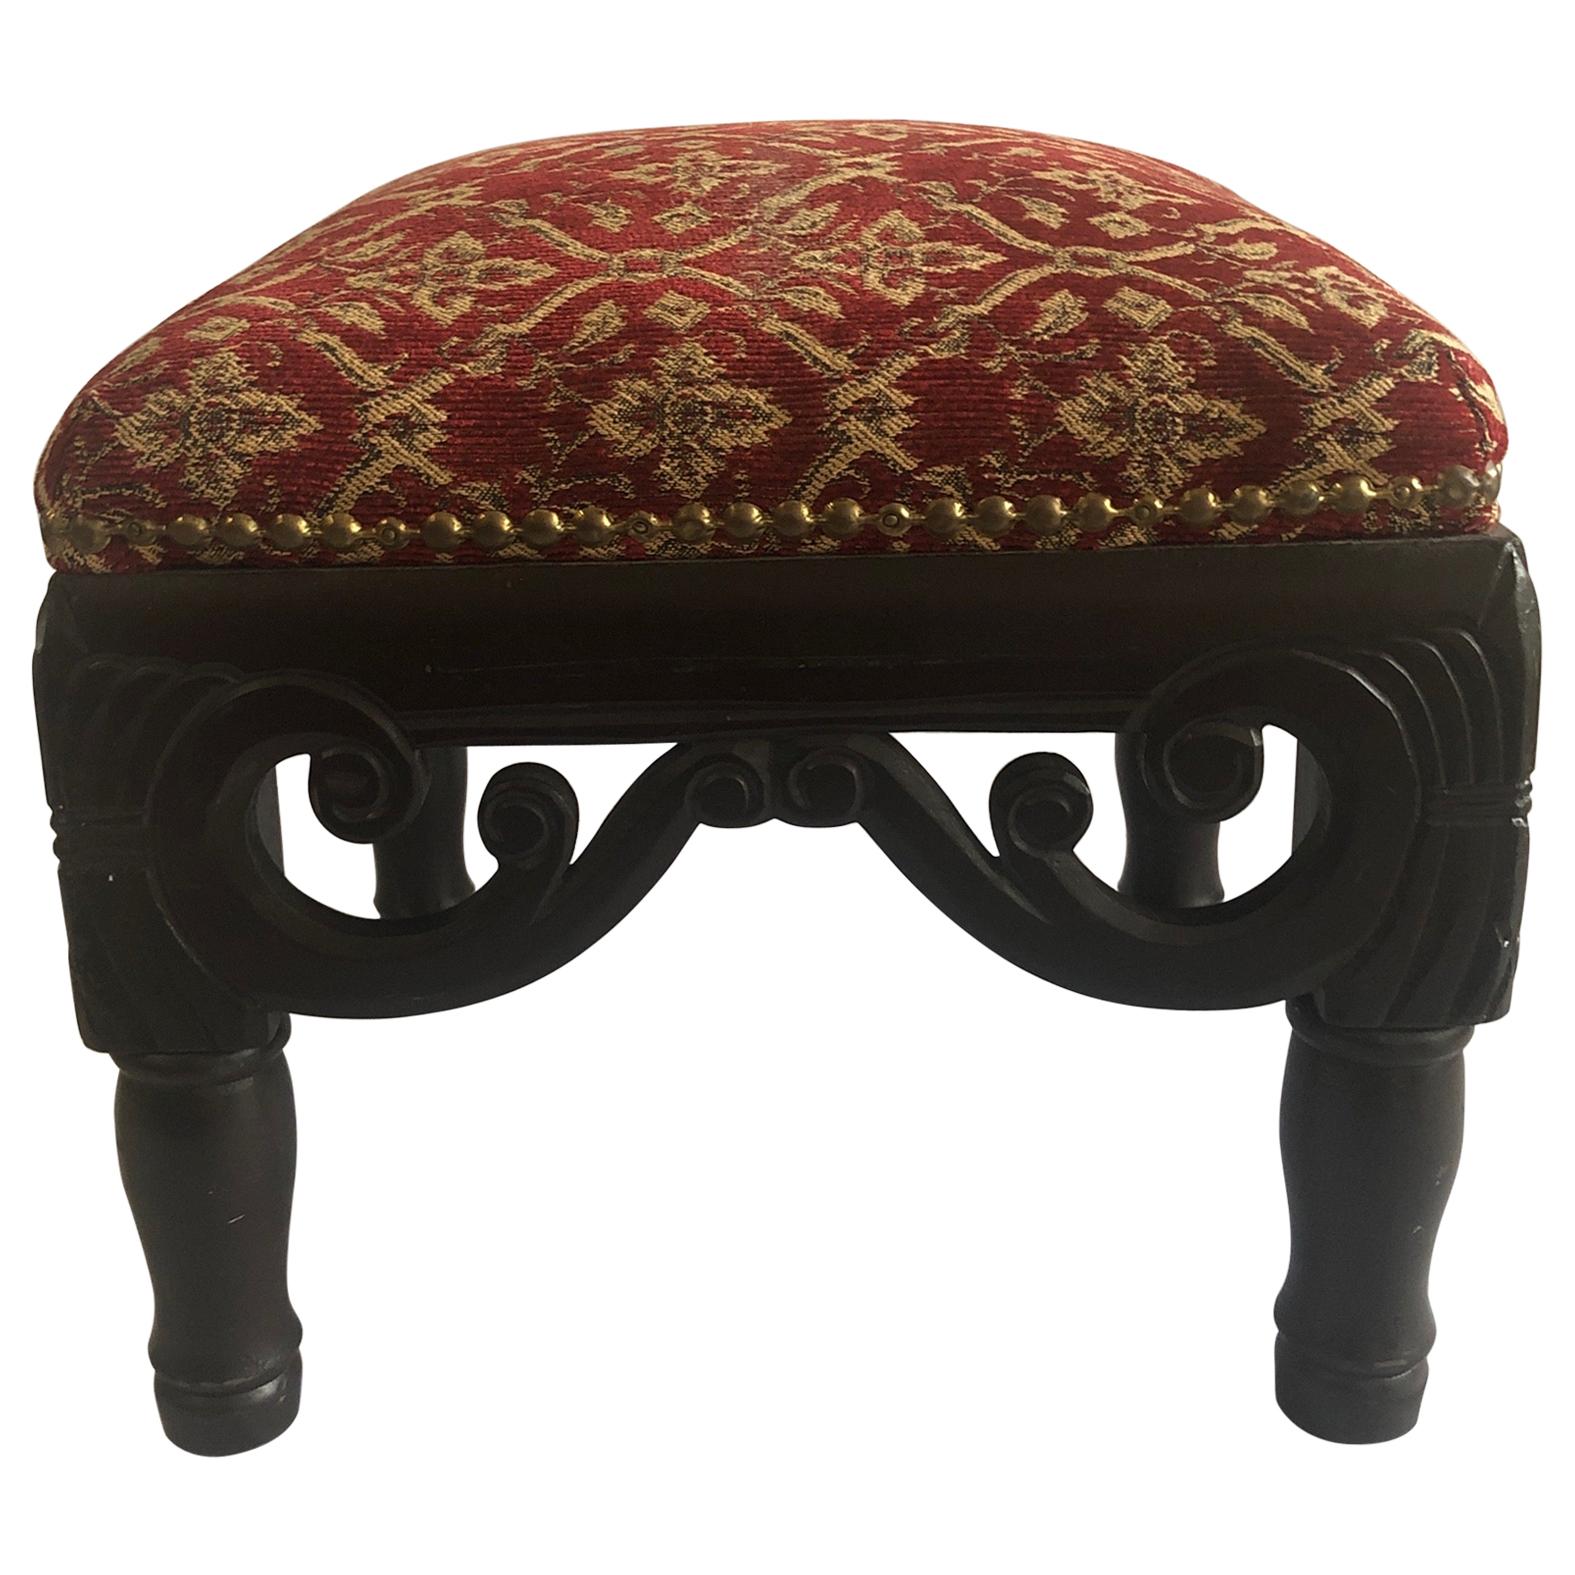 Vintage Red and Gold Square Upholstered Footstool